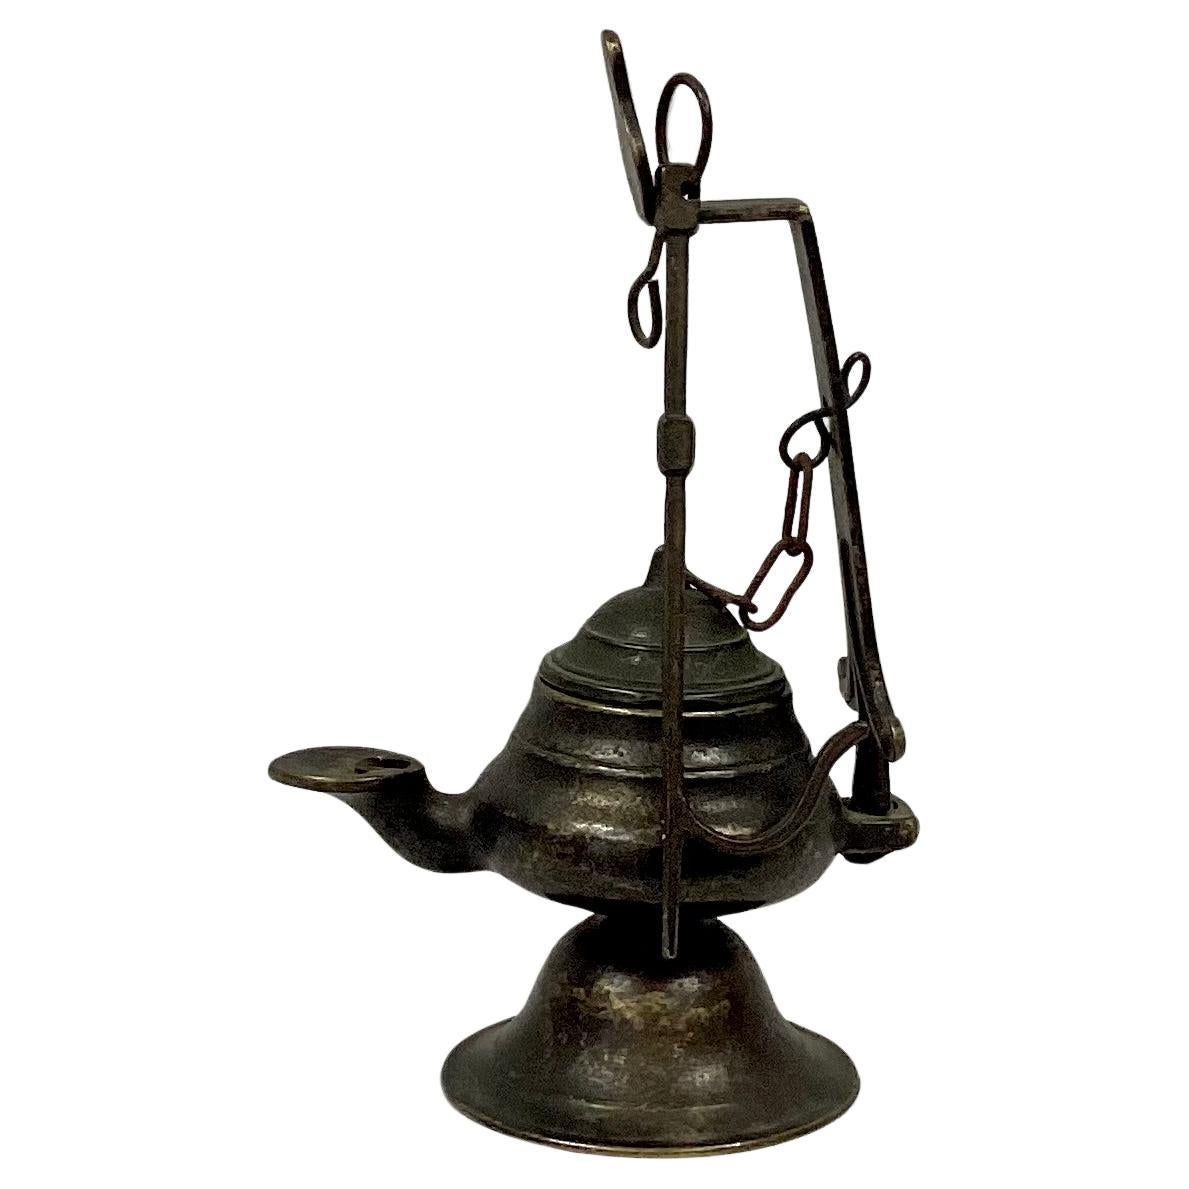 18th Century Italian hanging bronze oil lamp with removable lid. Solid bronze. Can be hung or used as a stand-alone decorating piece. Great piece to use with any decor.  Dimensions listed are including hanging bar. Oil lamp by itself is is 3.5